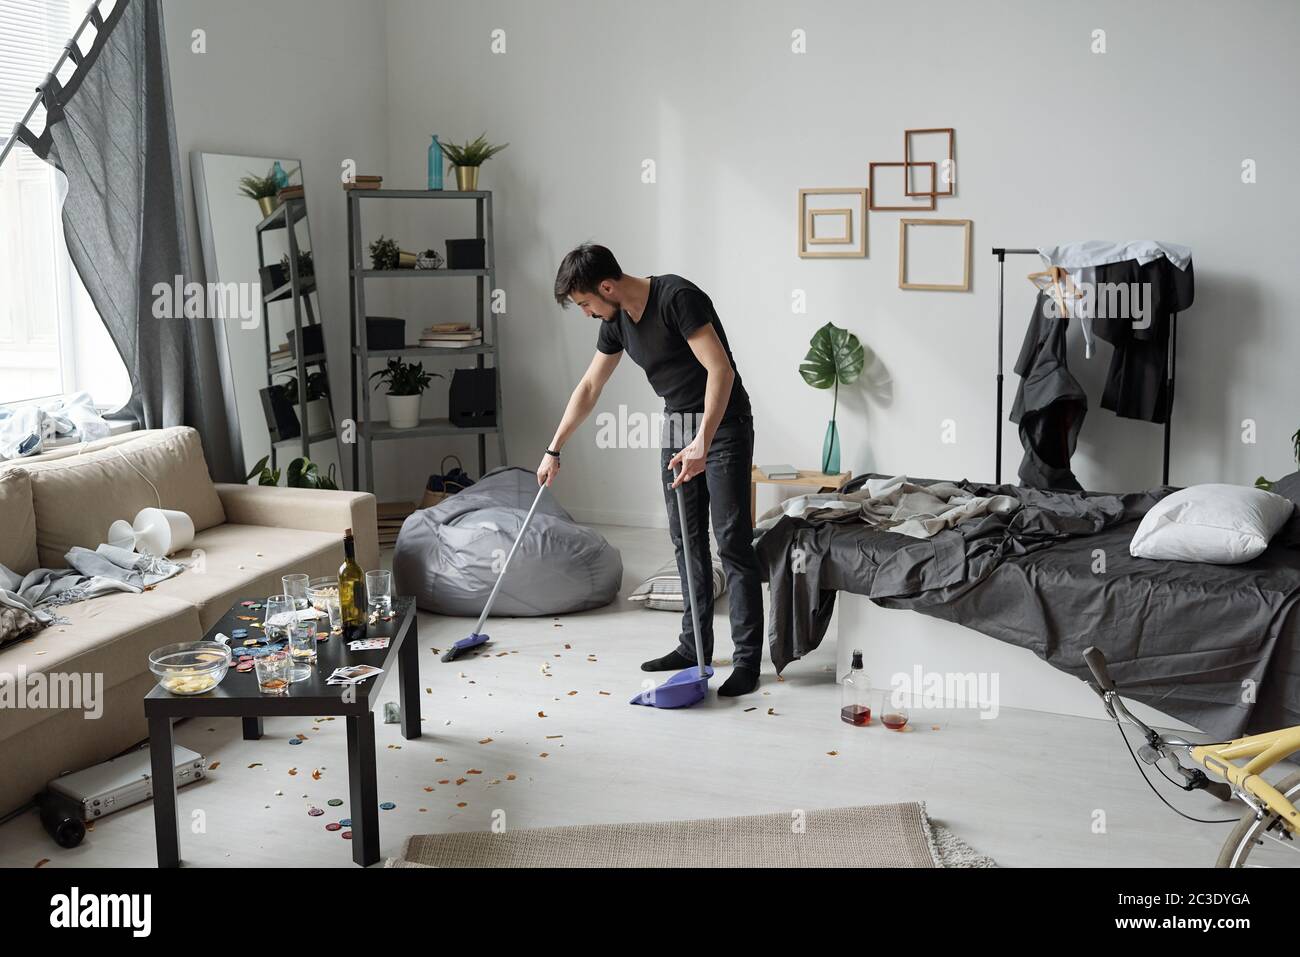 Young man sweeping floor at home after party: bottles, crumps and poker chips on floor Stock Photo